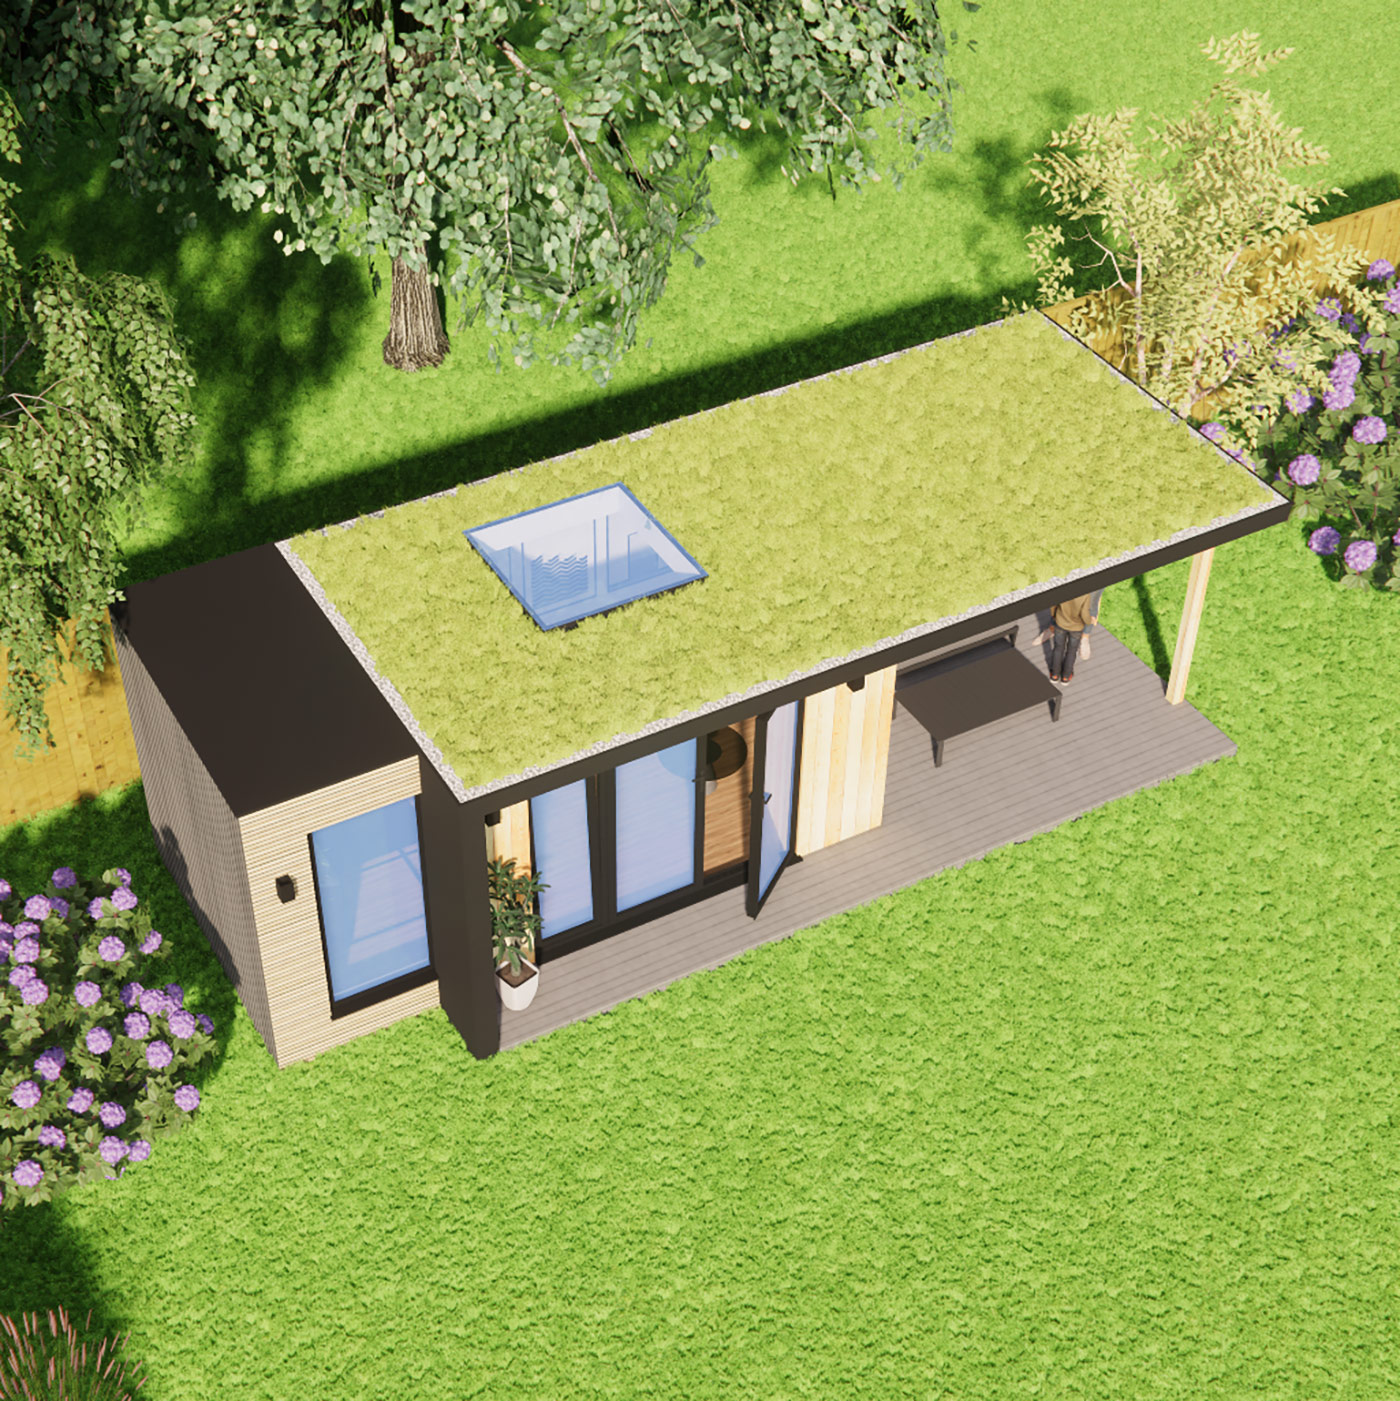 Exterior of 2.6m by 5.0m garden room design with green roof